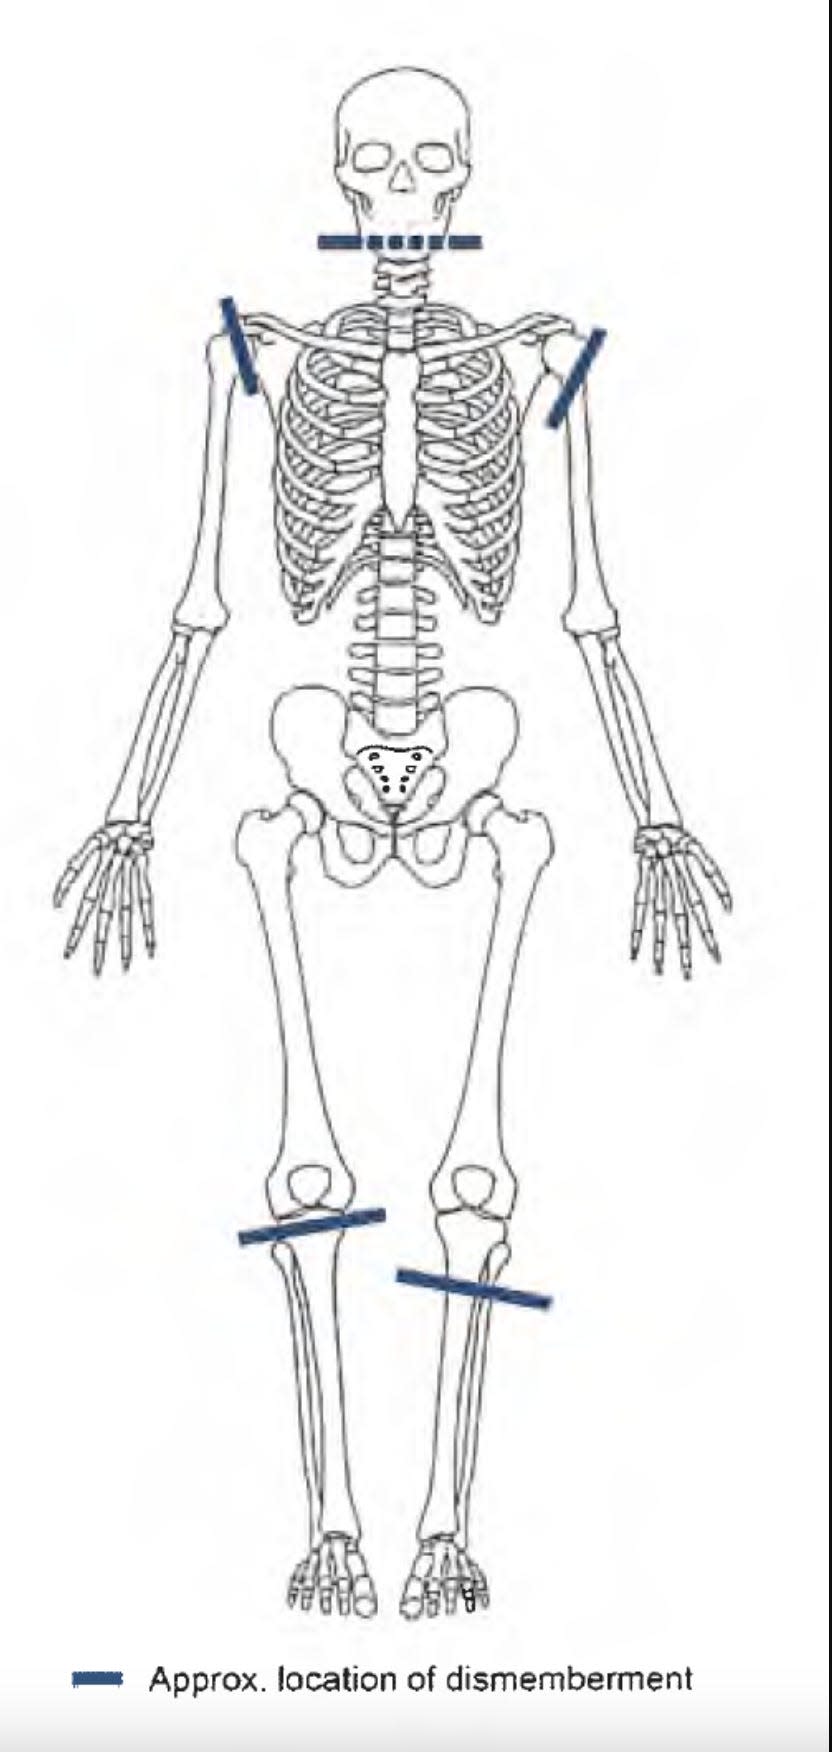 A diagram of a skeleton with lines at the neck, shoulders, and knees showing the approximate location of dismemberment.